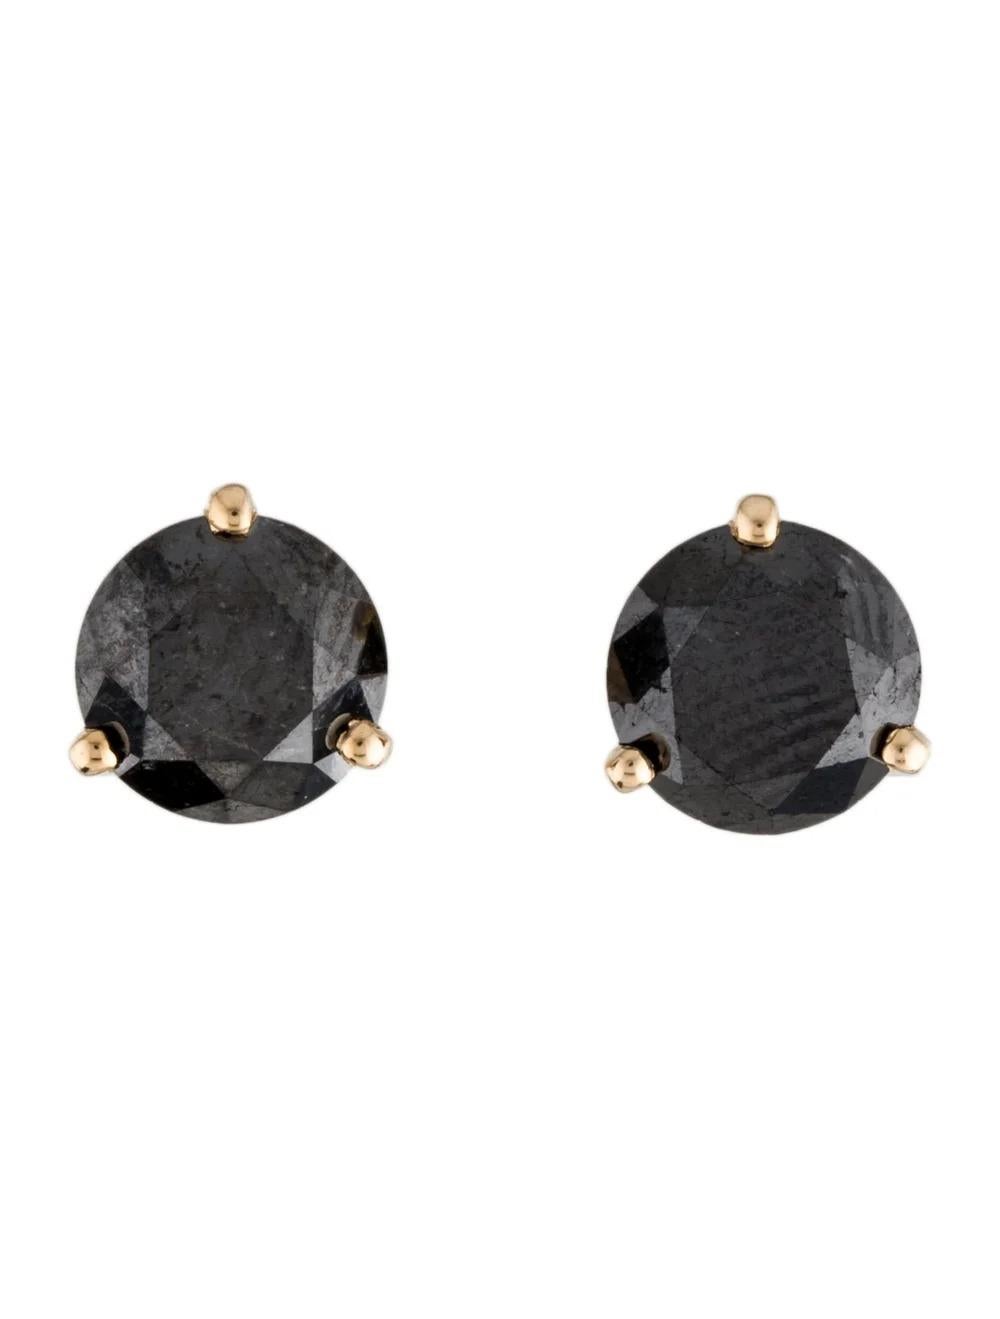 Introducing a dazzling pair of fine jewelry: these 14K Yellow Gold Diamond Stud Earrings. Crafted with precision and elegance, these earrings feature two round brilliant diamonds, each enhancing the allure of these stunning